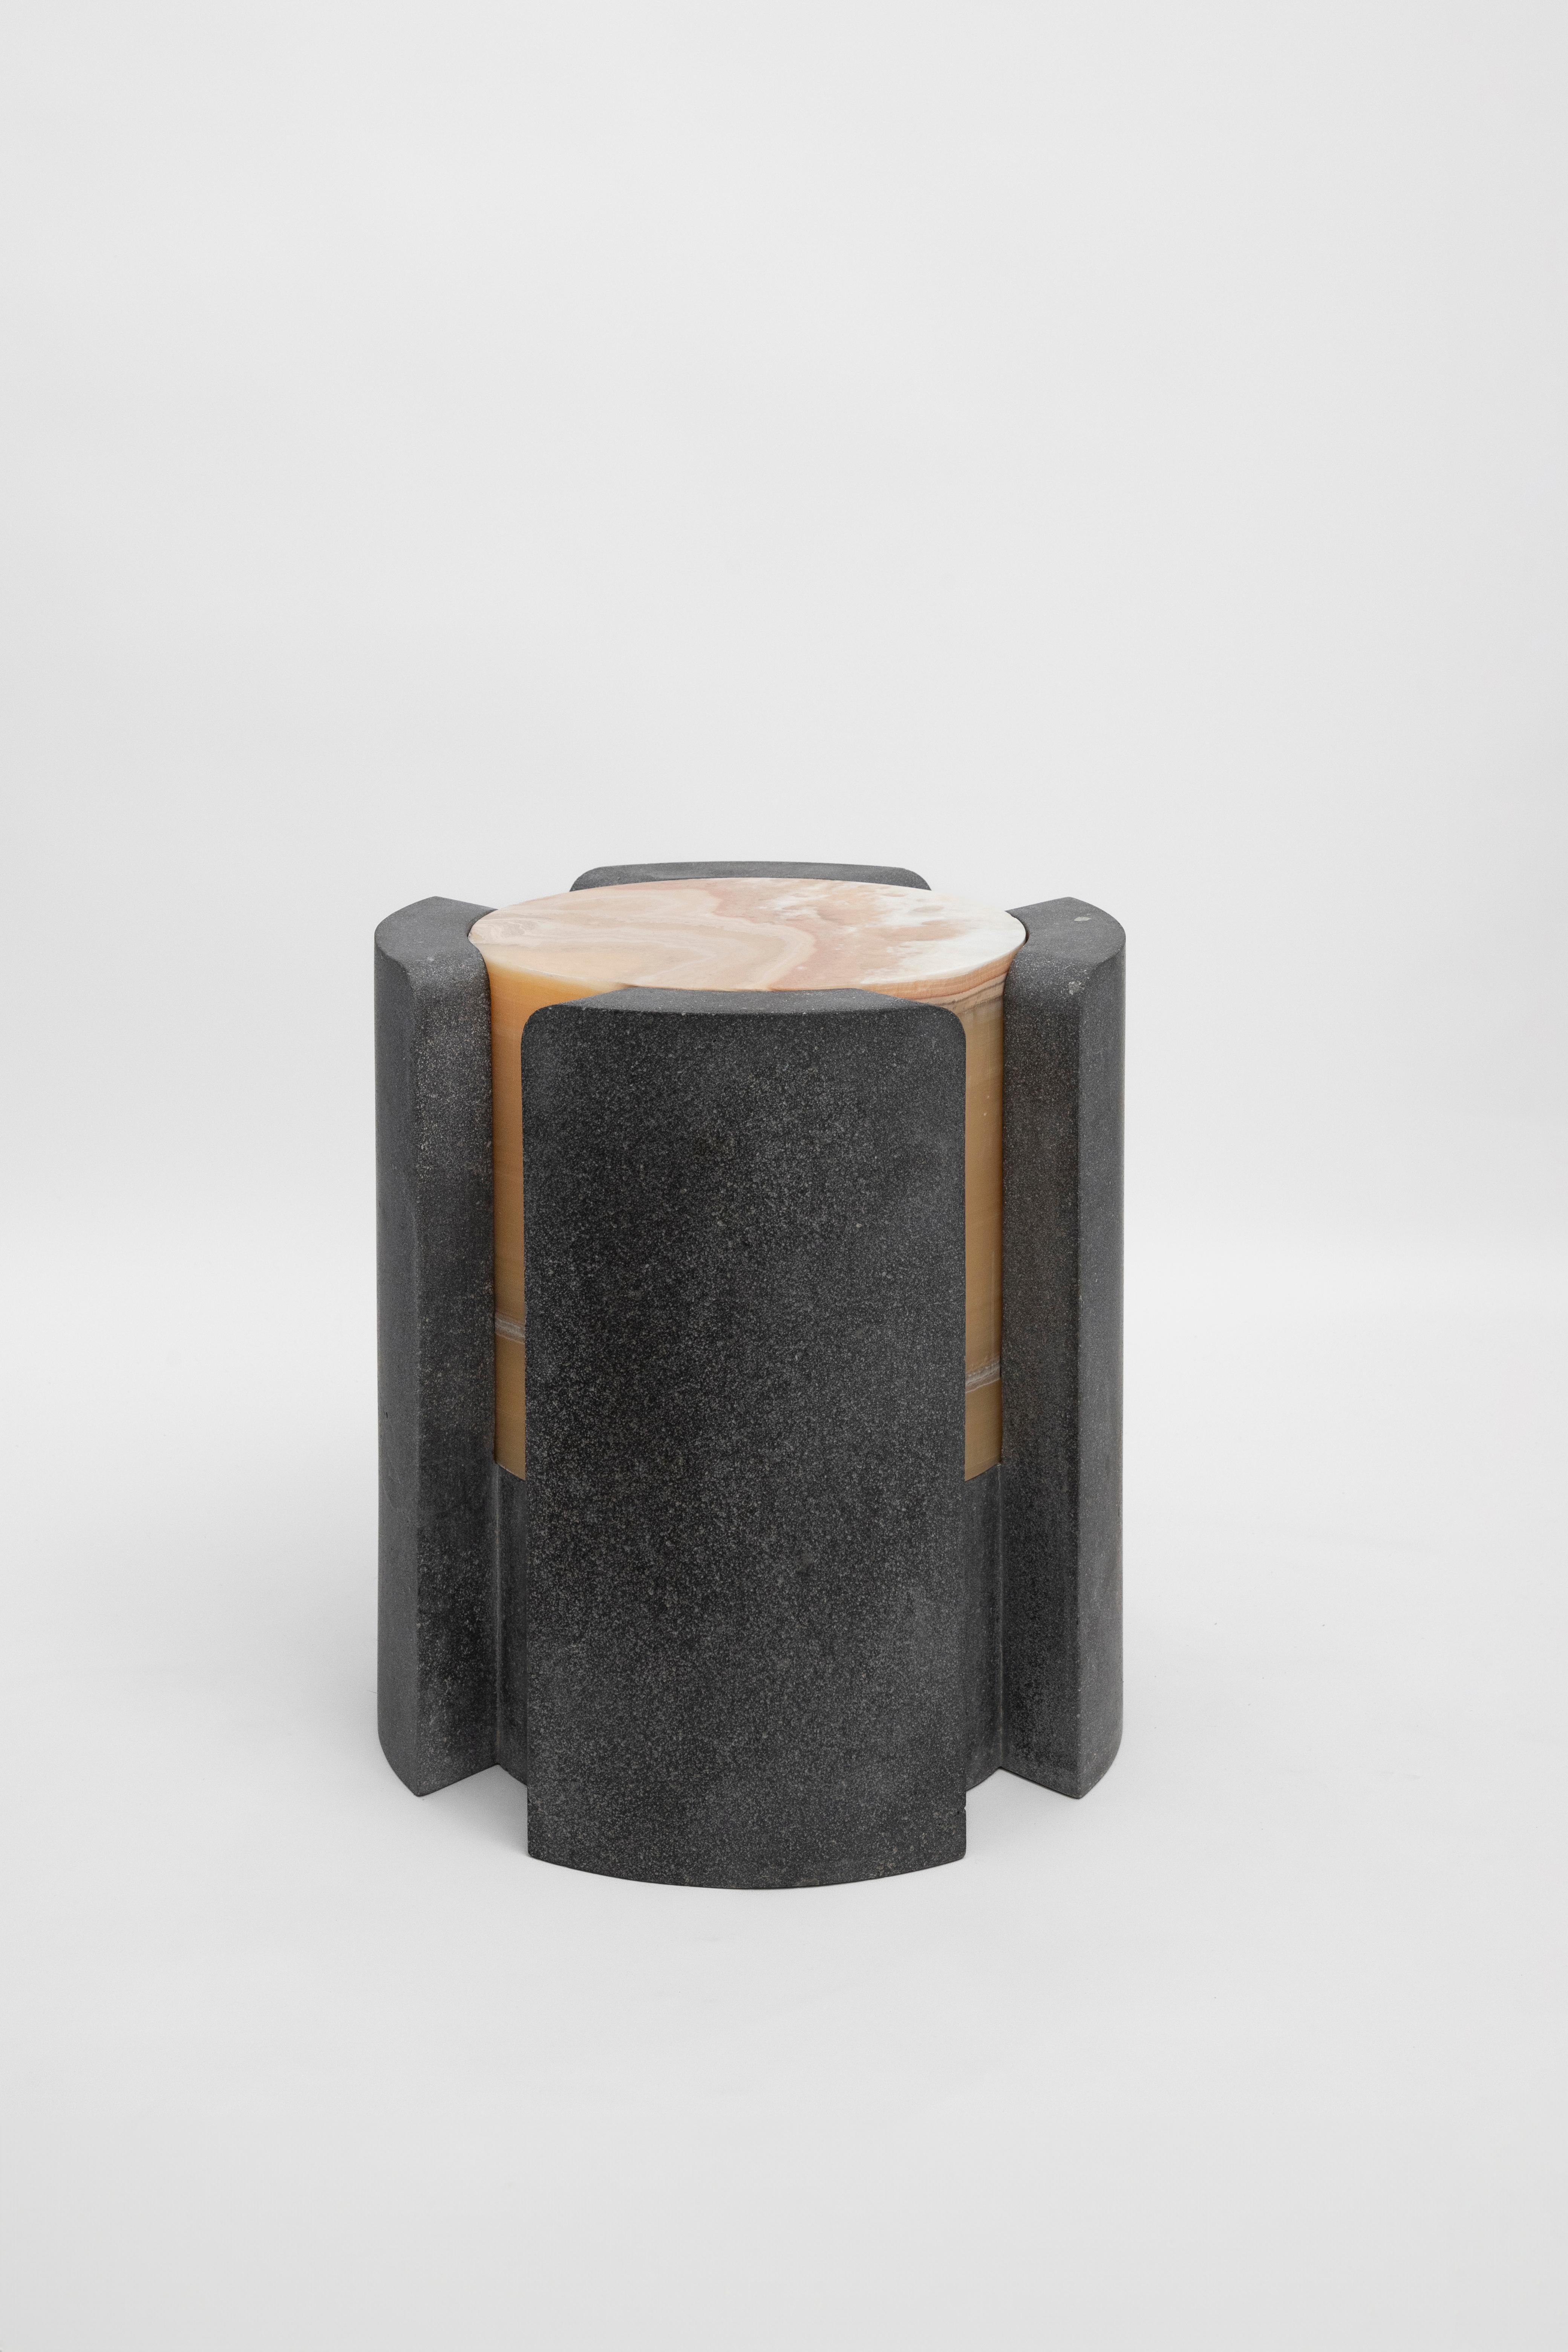 Materials: Lava stone and pineapple onyx
Indoors and outdoors
Side table / Stool

**As this work is made of natural stone, color and veins may vary from the photo**

Through an abstract geometric language where cubes and cylinders playfully